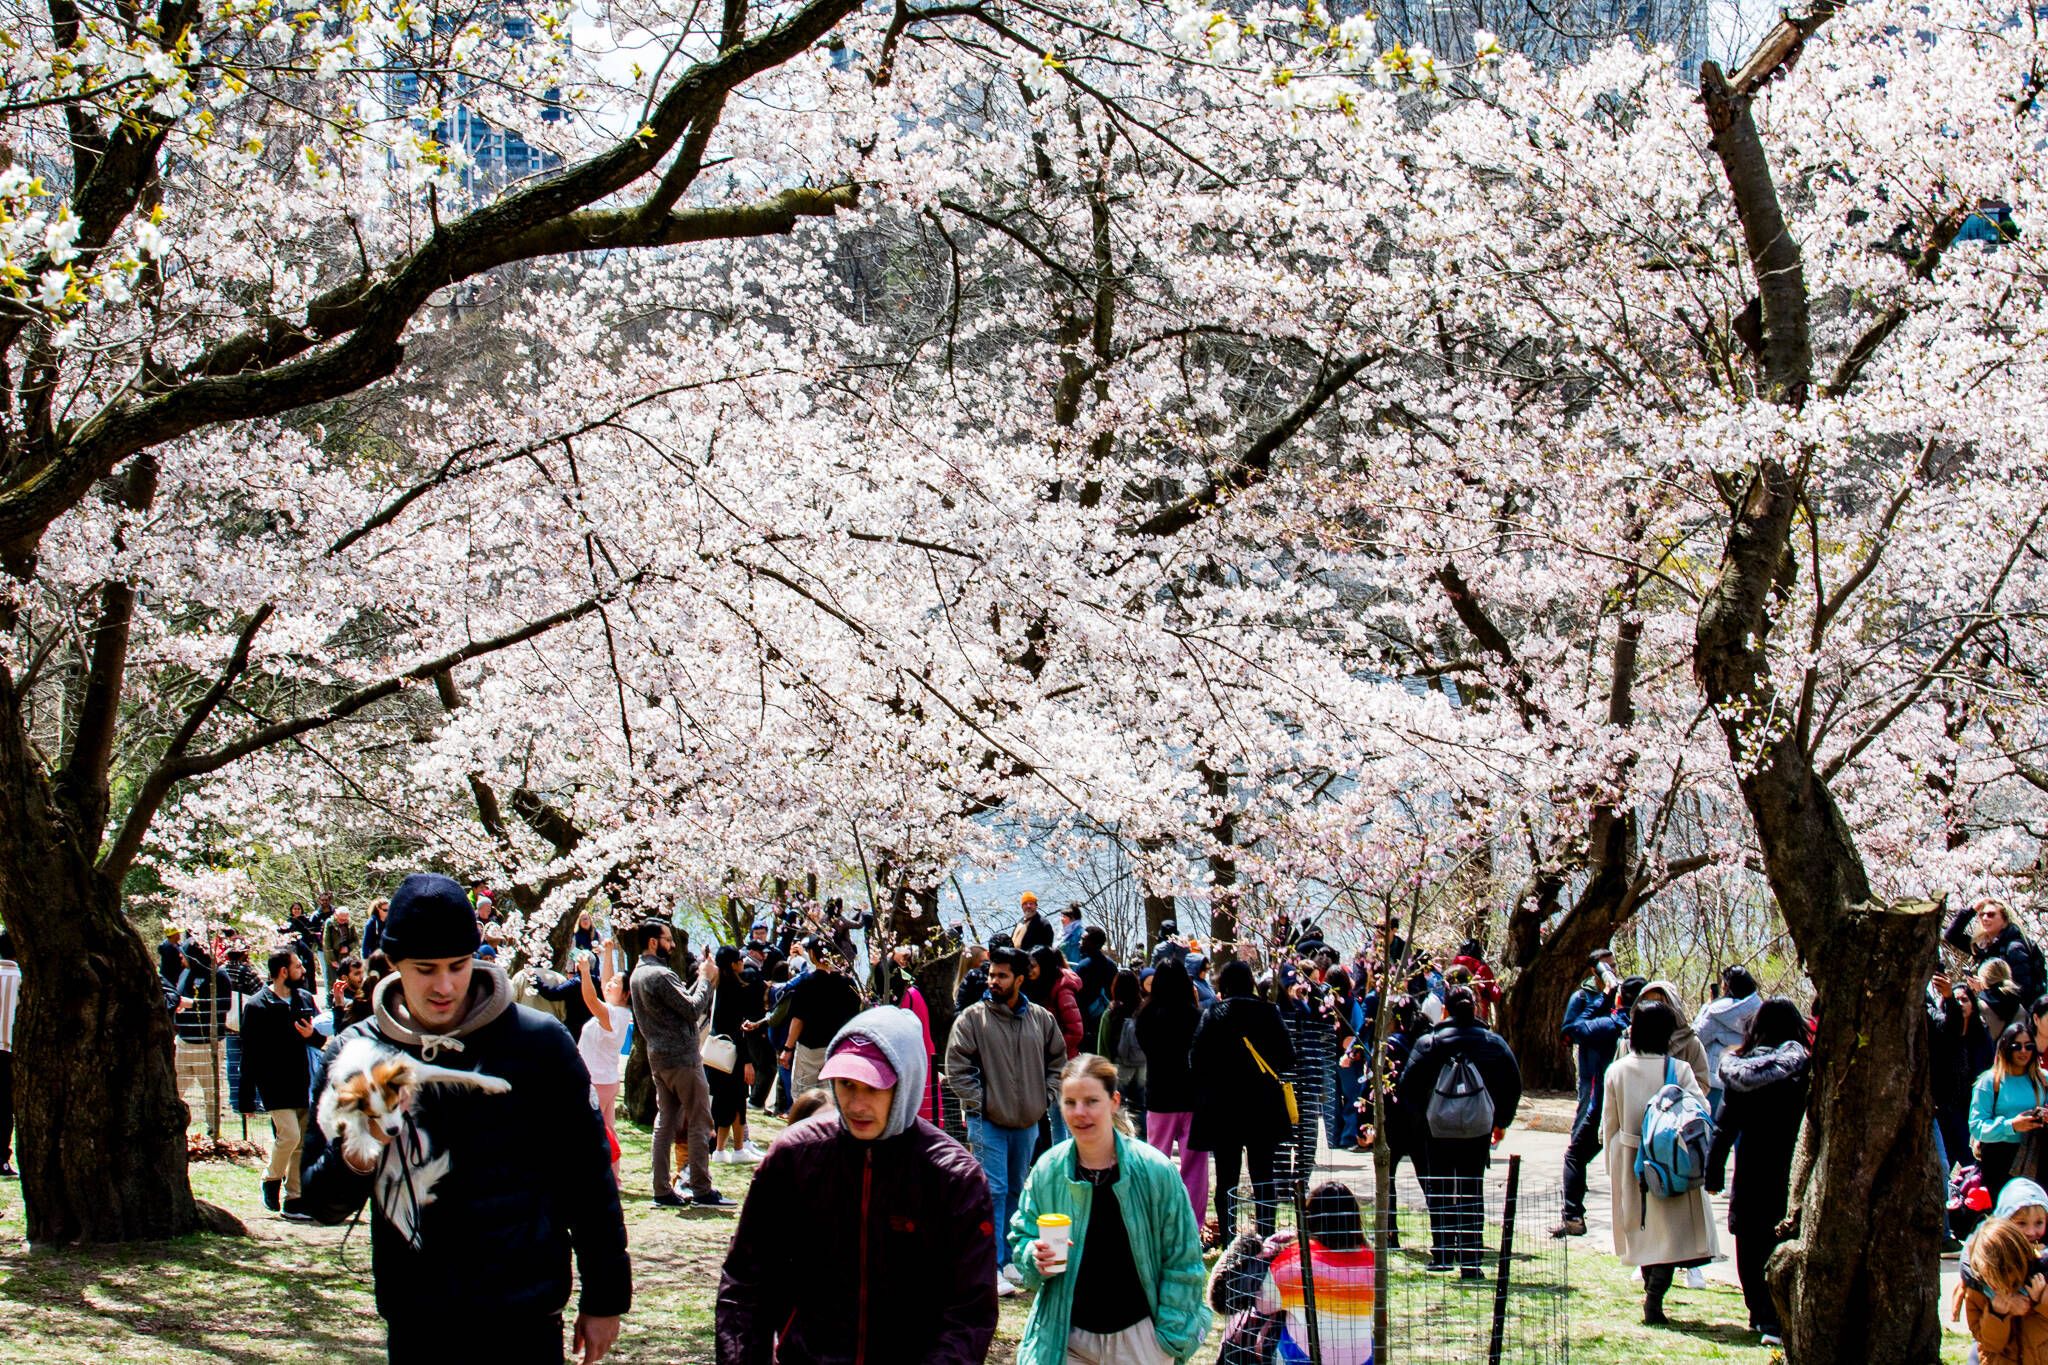 Breathtaking cherry blossoms draw massive crowds to High Park in Toronto